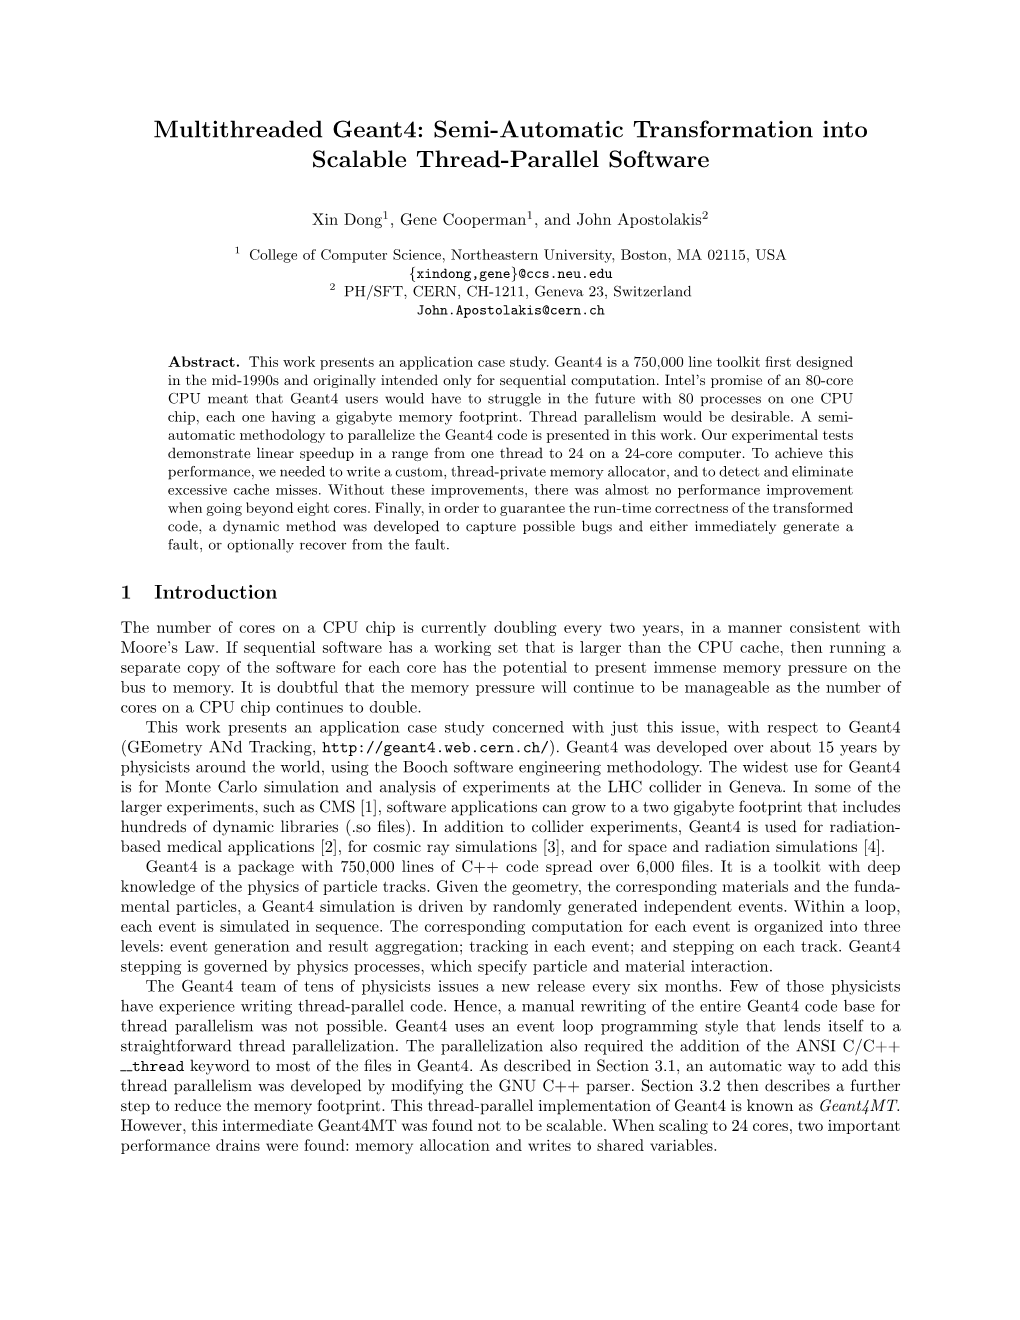 Semi-Automatic Transformation Into Scalable Thread-Parallel Software